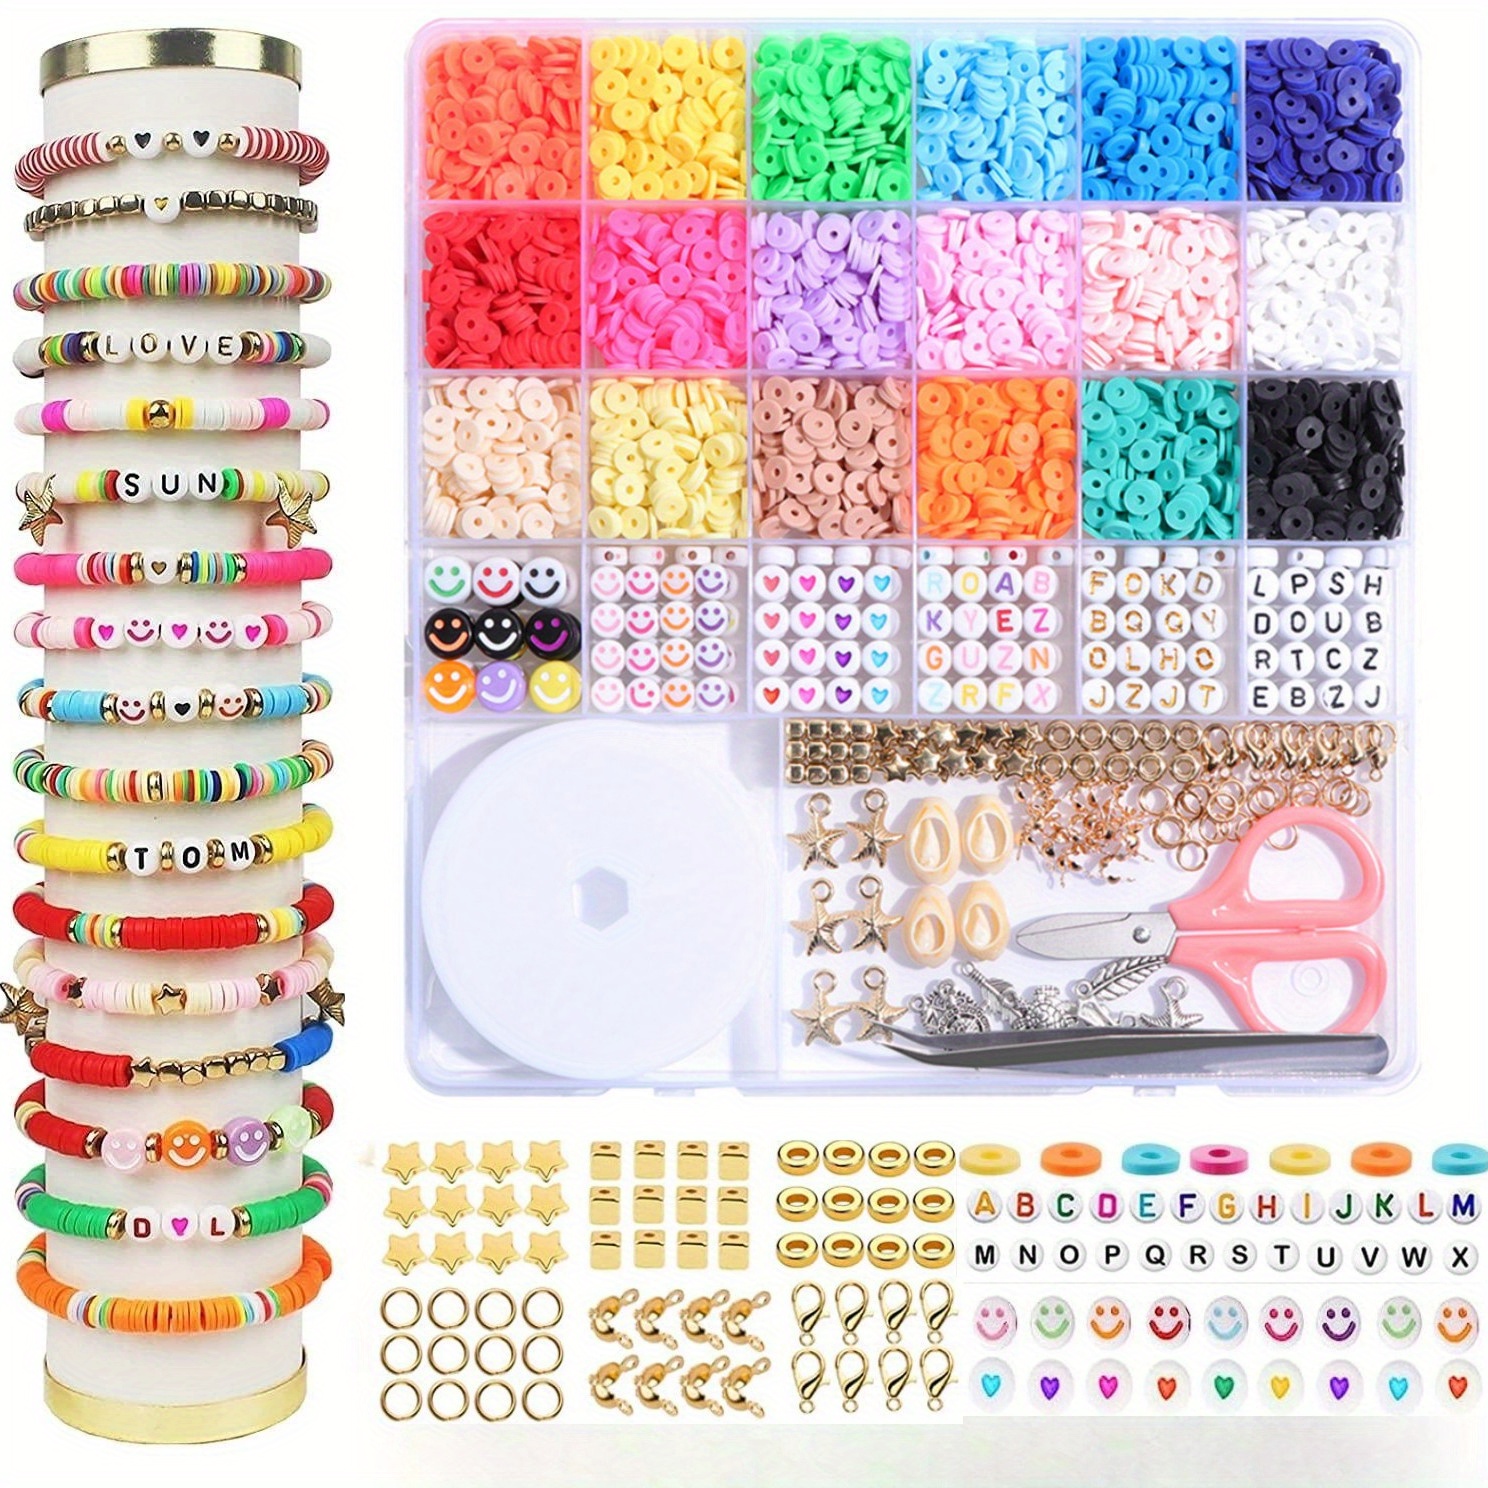 5500pcs Clay Beads Bracelet Making Kit, Friendship Bracelet Beads Flat  Round Beads For Jewelry Making Gifts For Birthday Gift